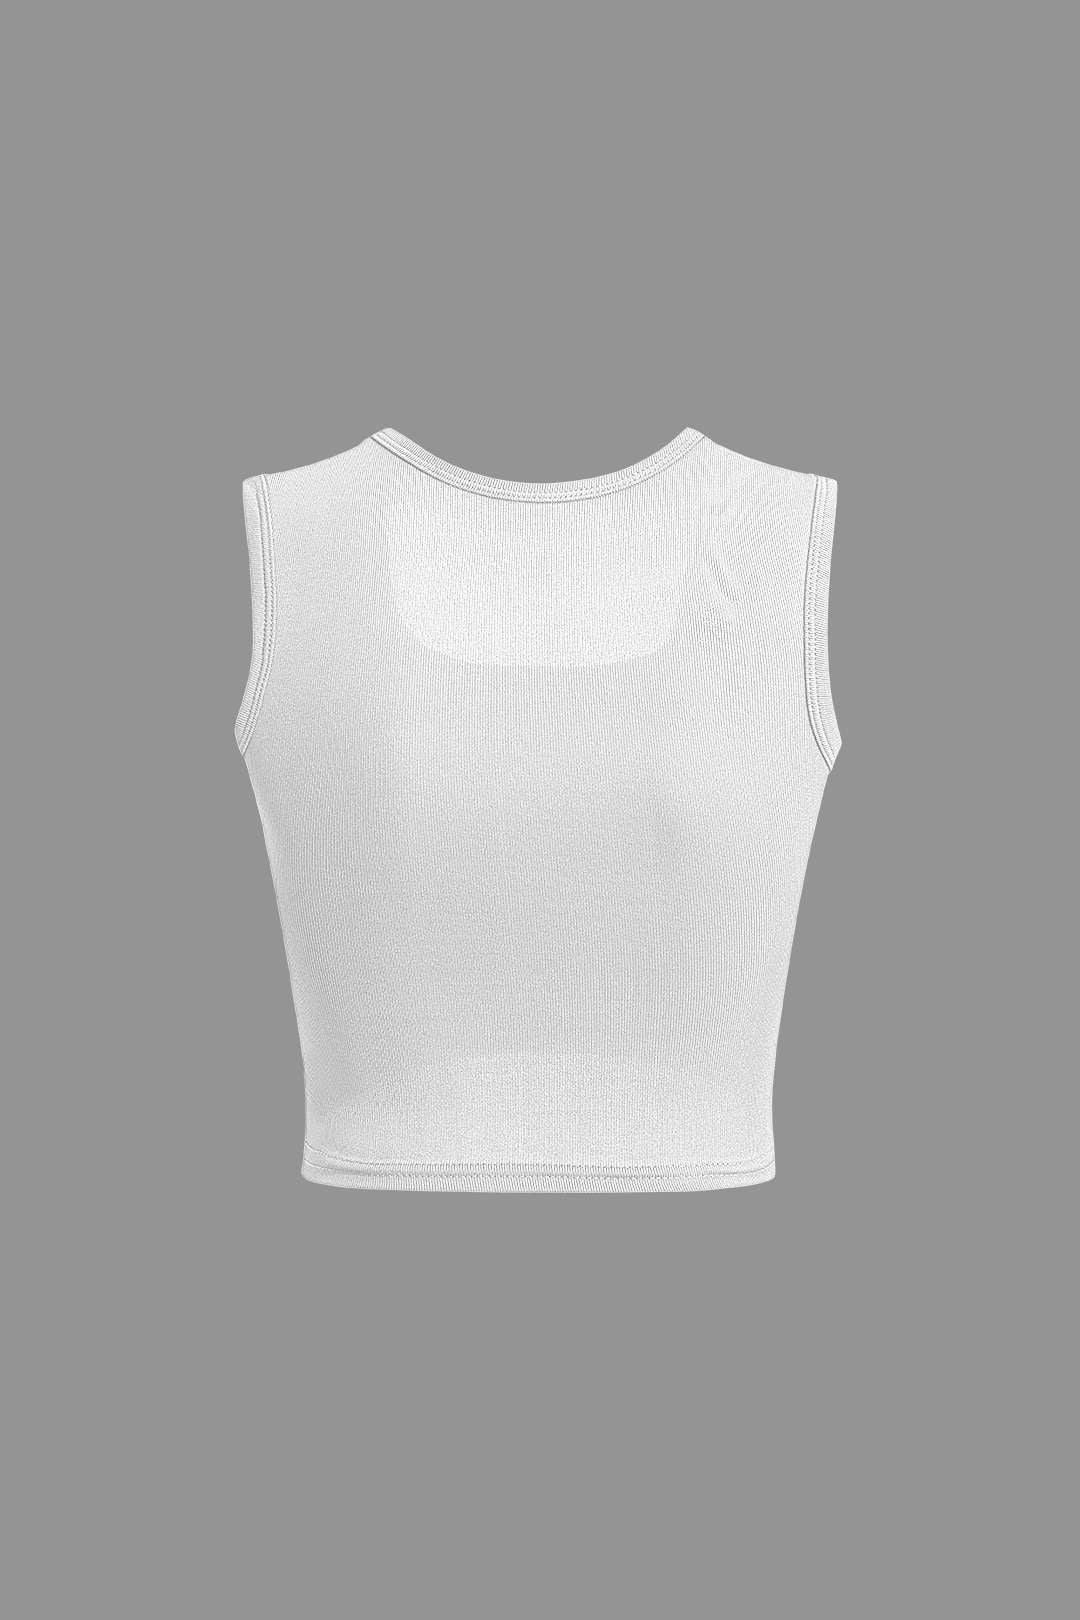 Solid Square Neck Tank Top